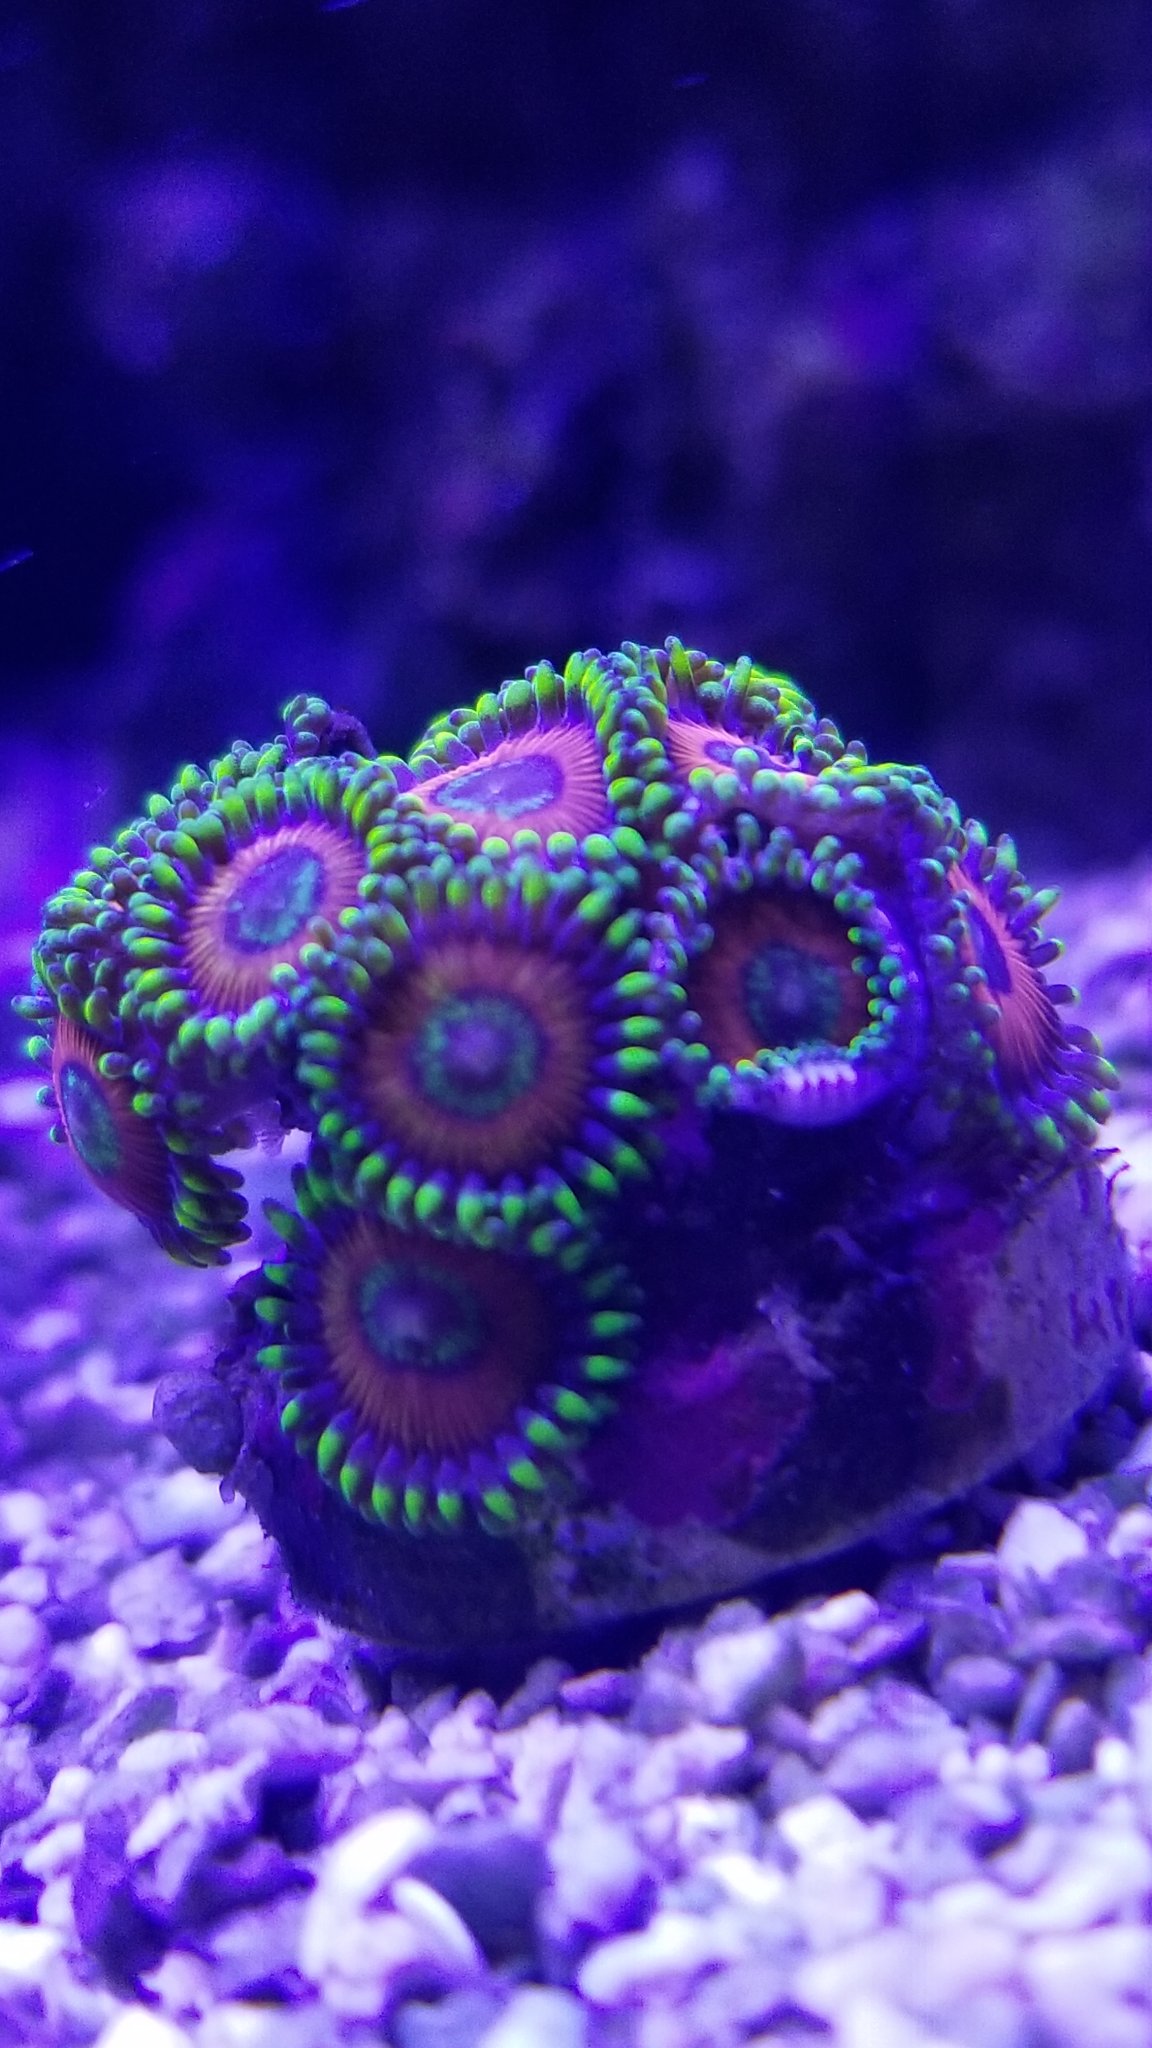 Zoa purchased at FAMAS